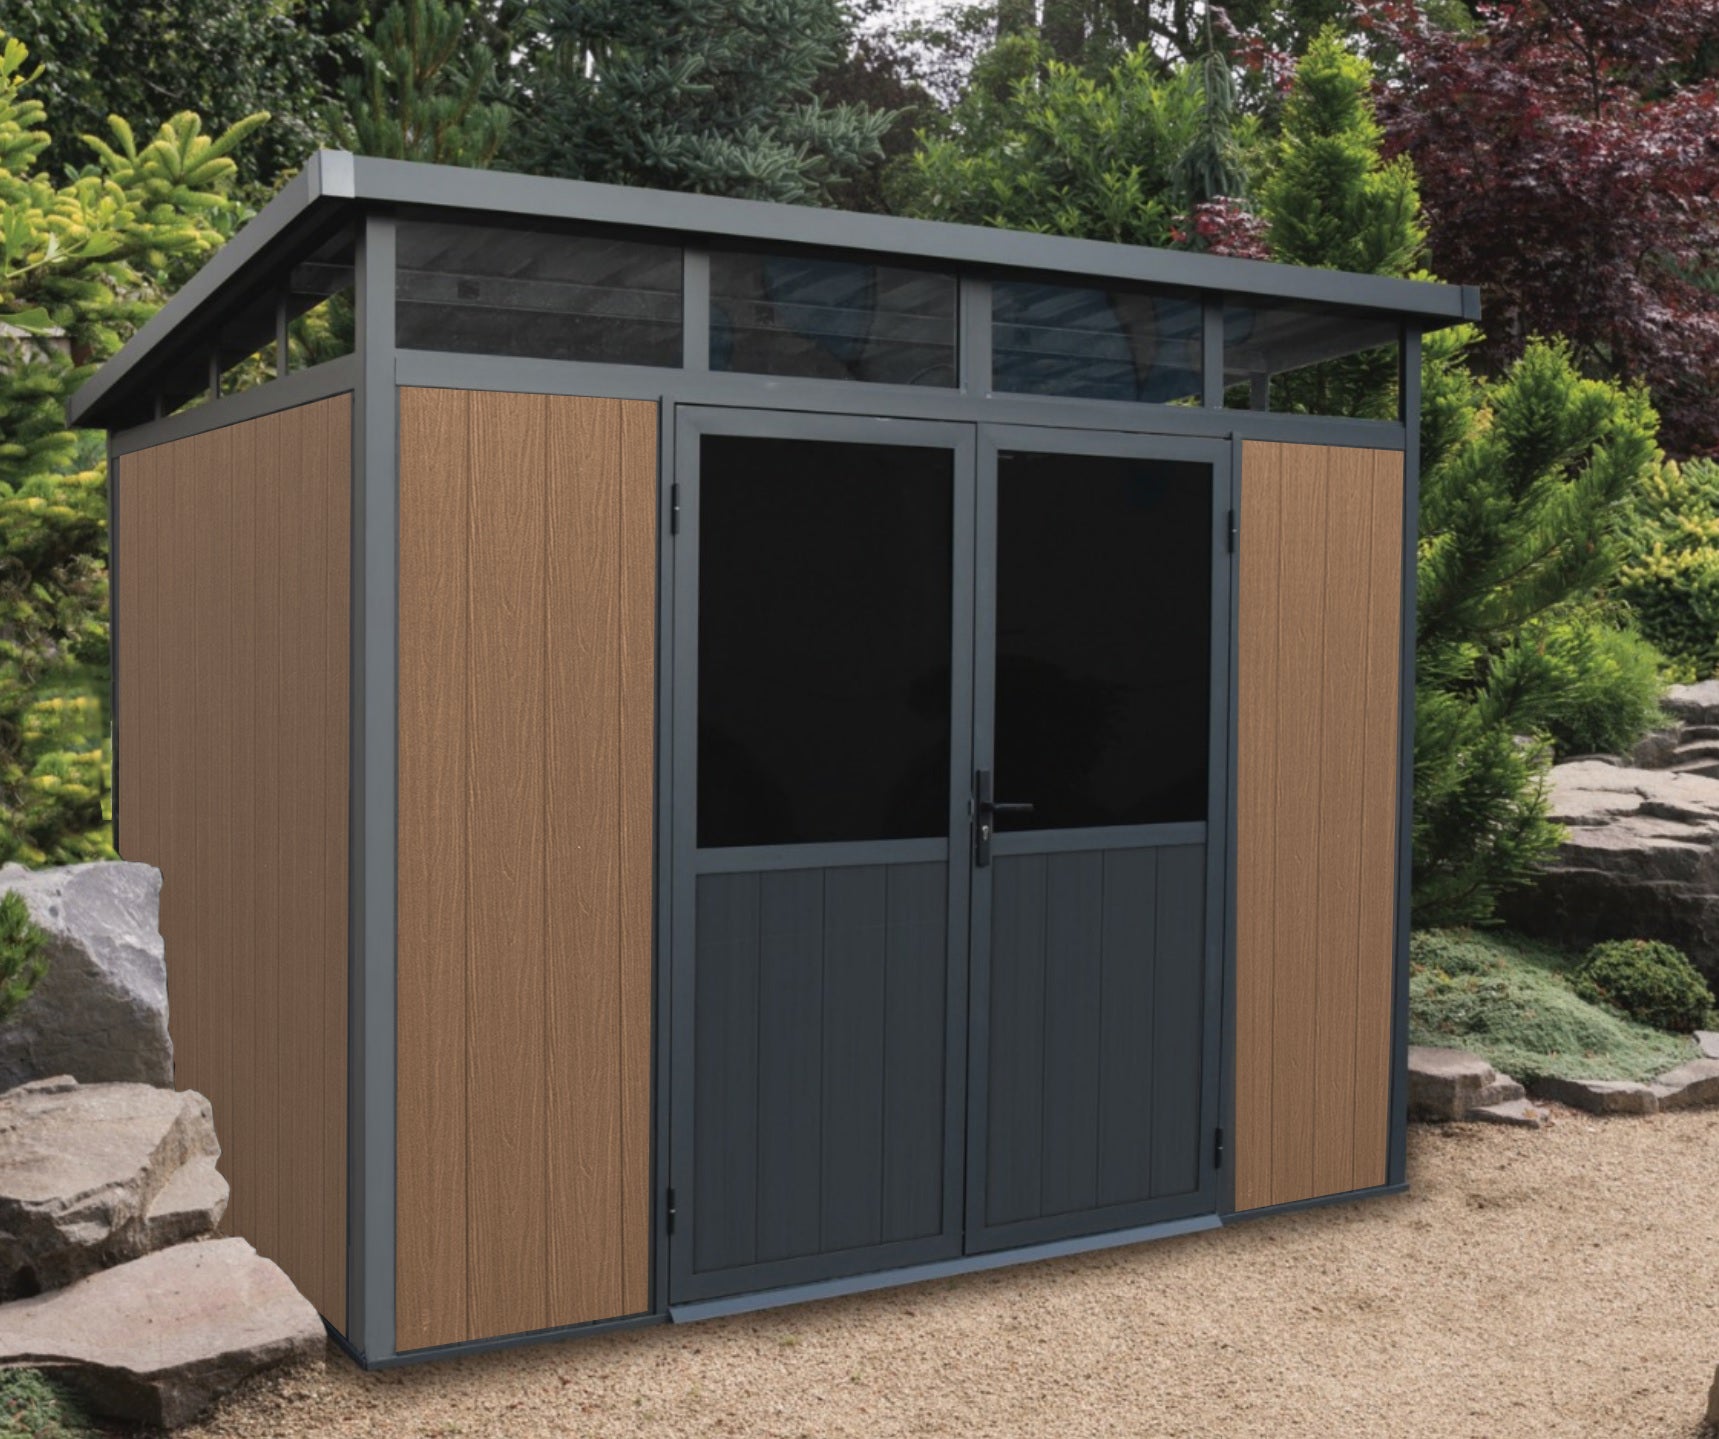 9 ft. x 7 ft. Wood Plastic Composite Heavy Duty Shed Brown Color